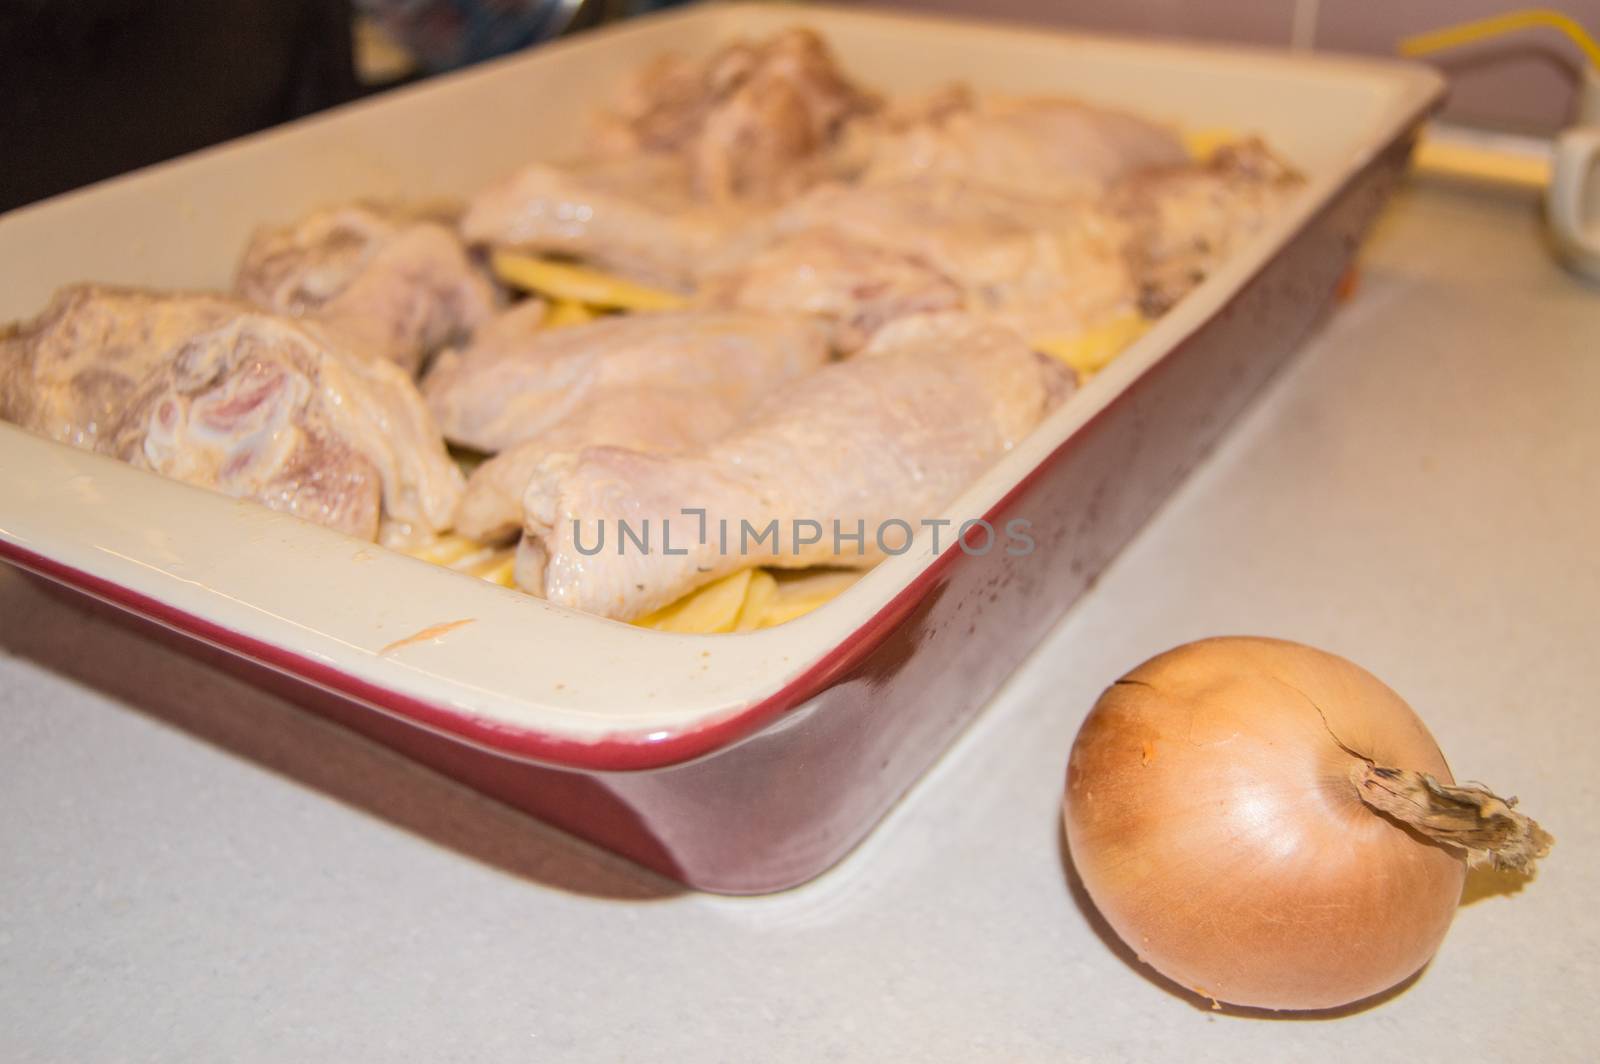 Pieces of raw chicken and sliced potatoes, marinated with mayonnaise and laid out in ceramic baking dish. Cooking holiday food for Christmas, Easter, Thanksgiving. concept of a family holiday dinner